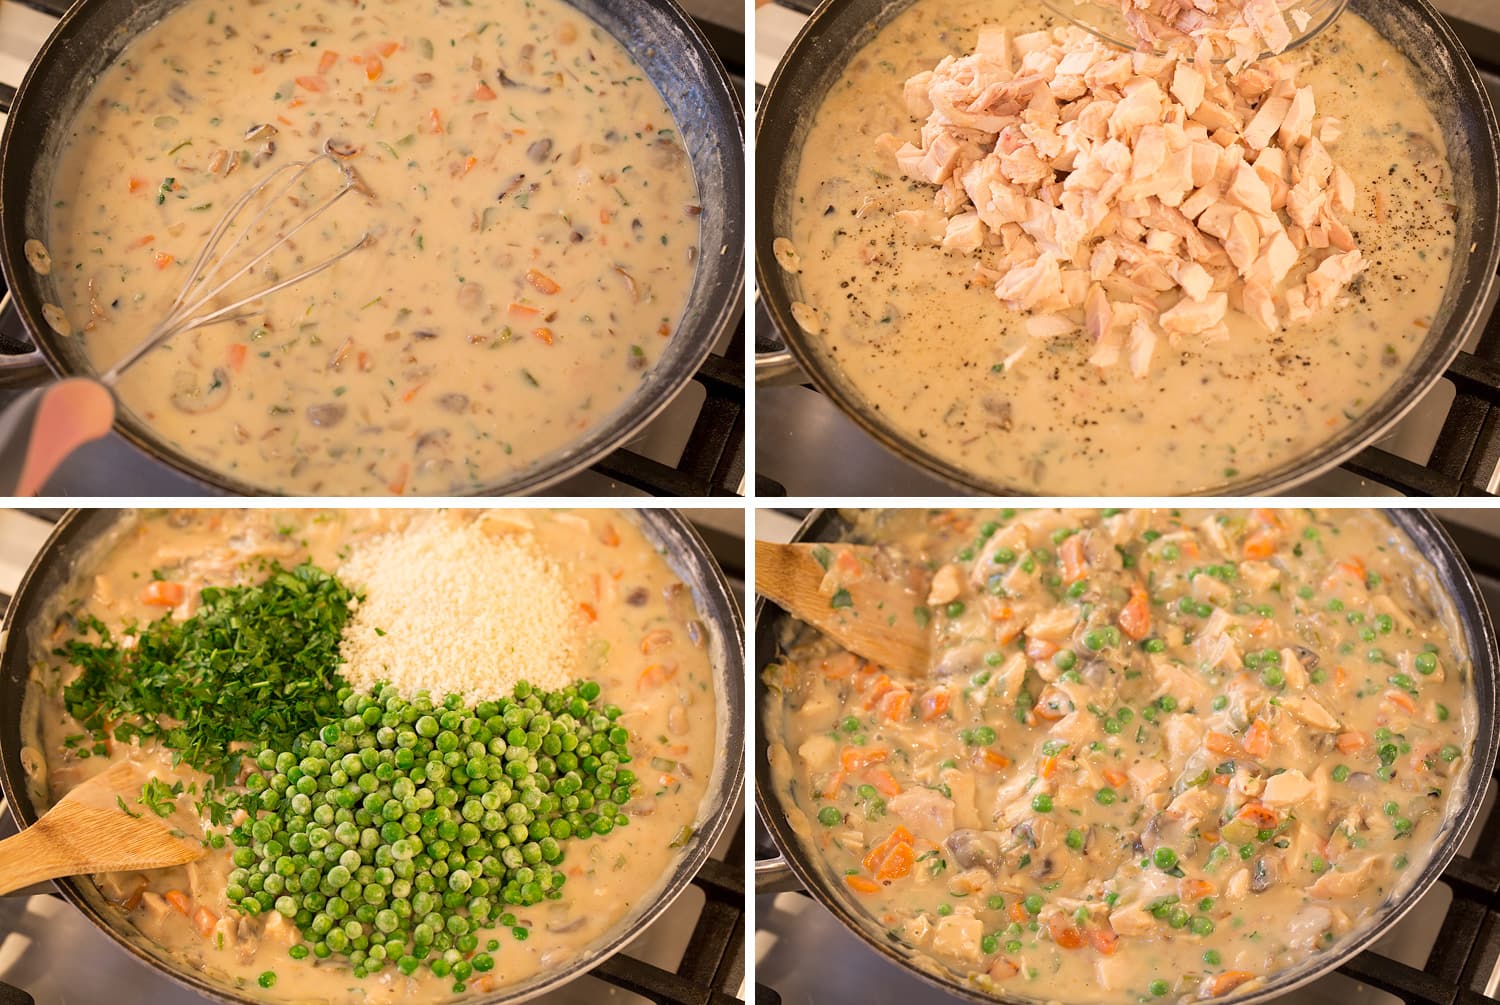 Steps of making pot pie sauce and fillings.